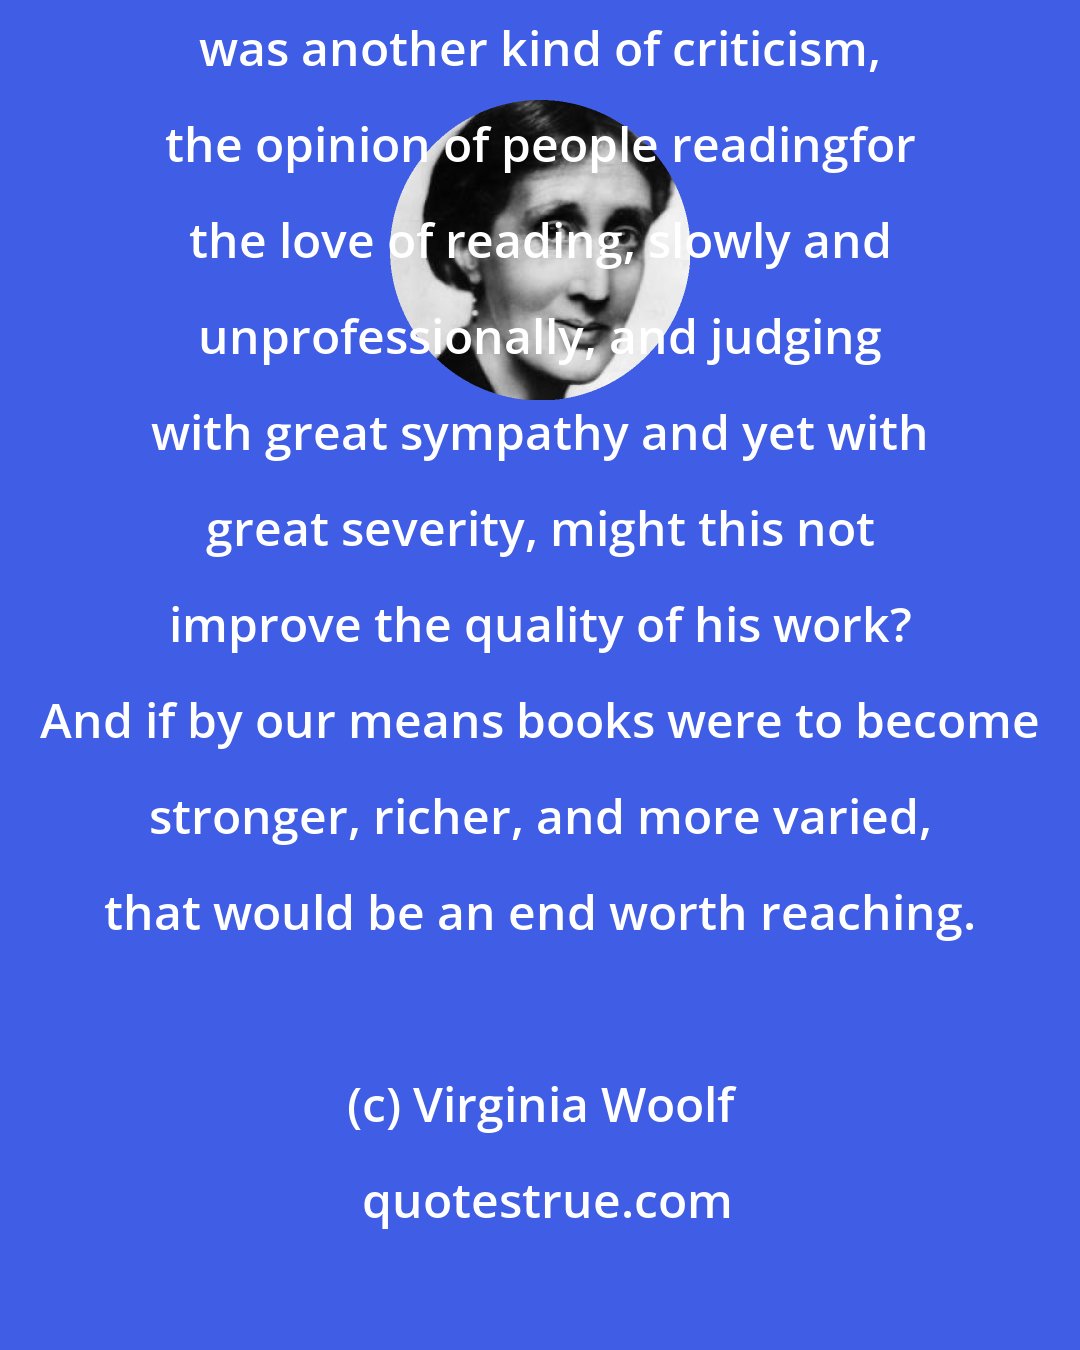 Virginia Woolf: If behind the erratic gunfire of the press the author felt that there was another kind of criticism, the opinion of people readingfor the love of reading, slowly and unprofessionally, and judging with great sympathy and yet with great severity, might this not improve the quality of his work? And if by our means books were to become stronger, richer, and more varied, that would be an end worth reaching.